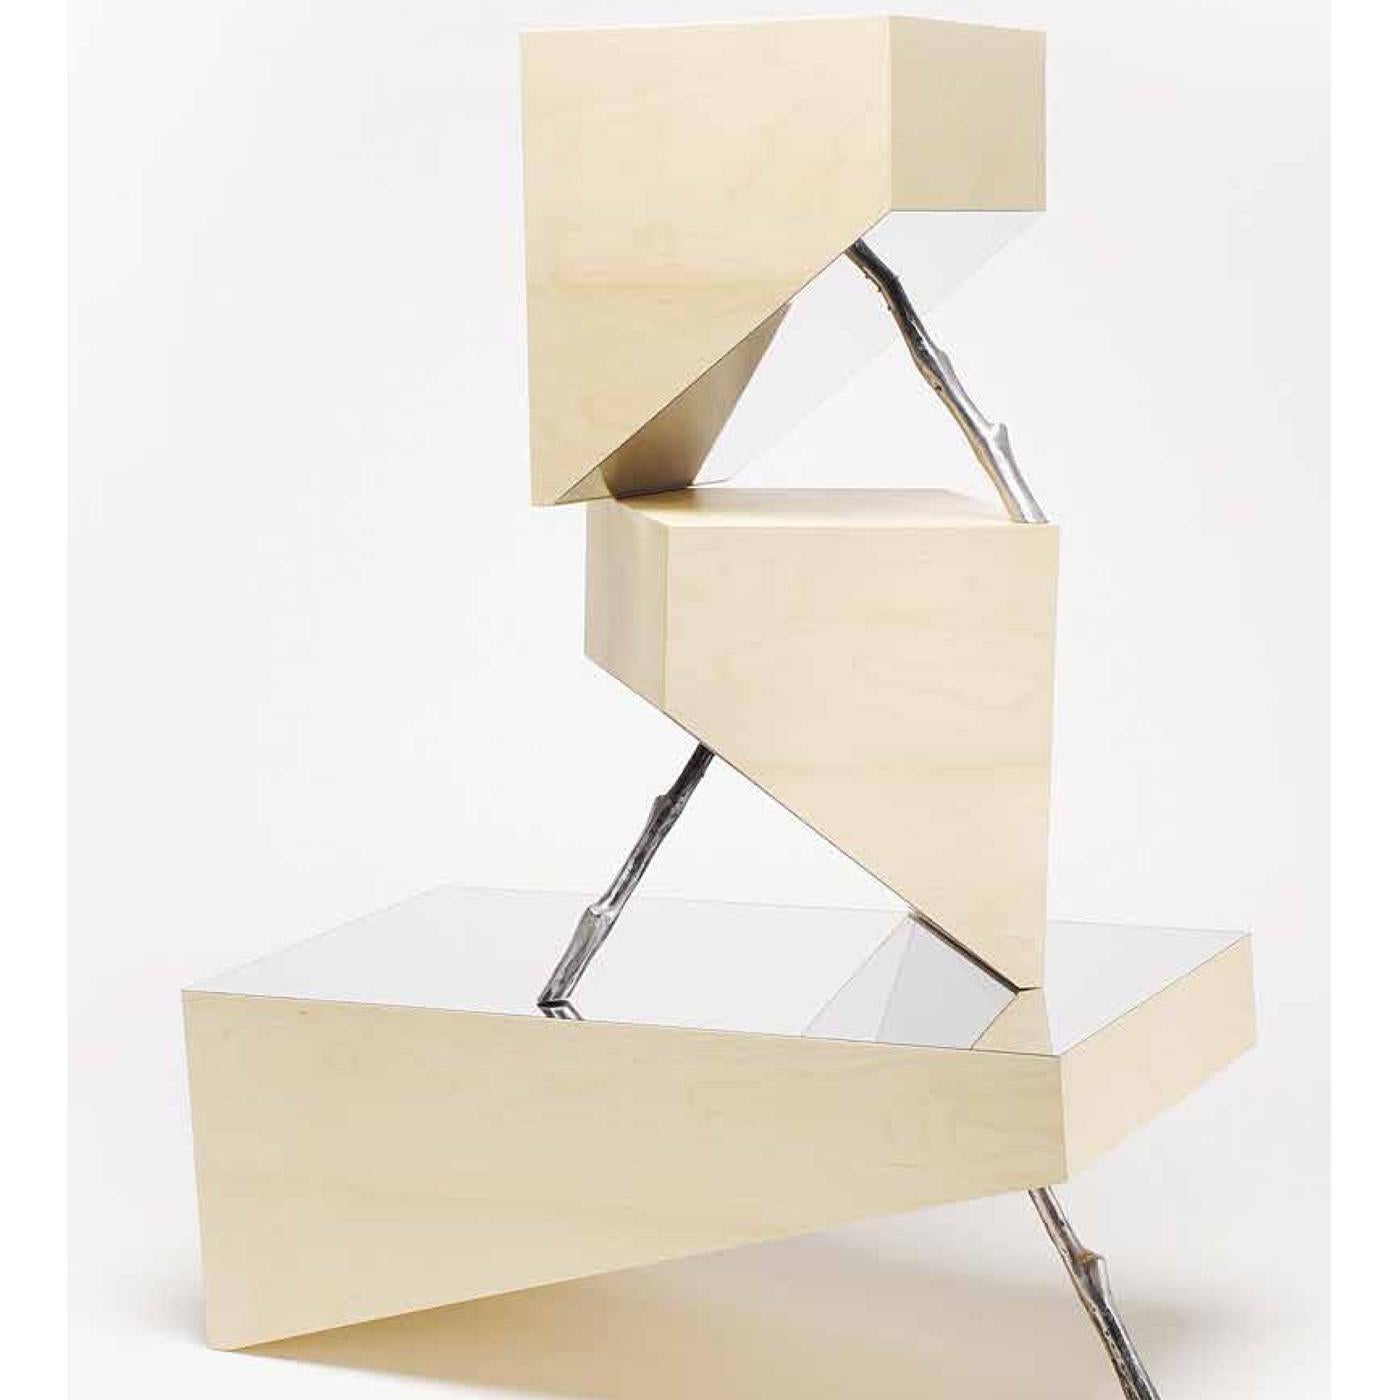 Inspired by the spiritual and physical balance of Zen practice, this captivating side table is marked by a bold geometric silhouette. The bamboo frame has a steel top with a mirror-polish finish and is supported by an aluminum stick in a seemingly